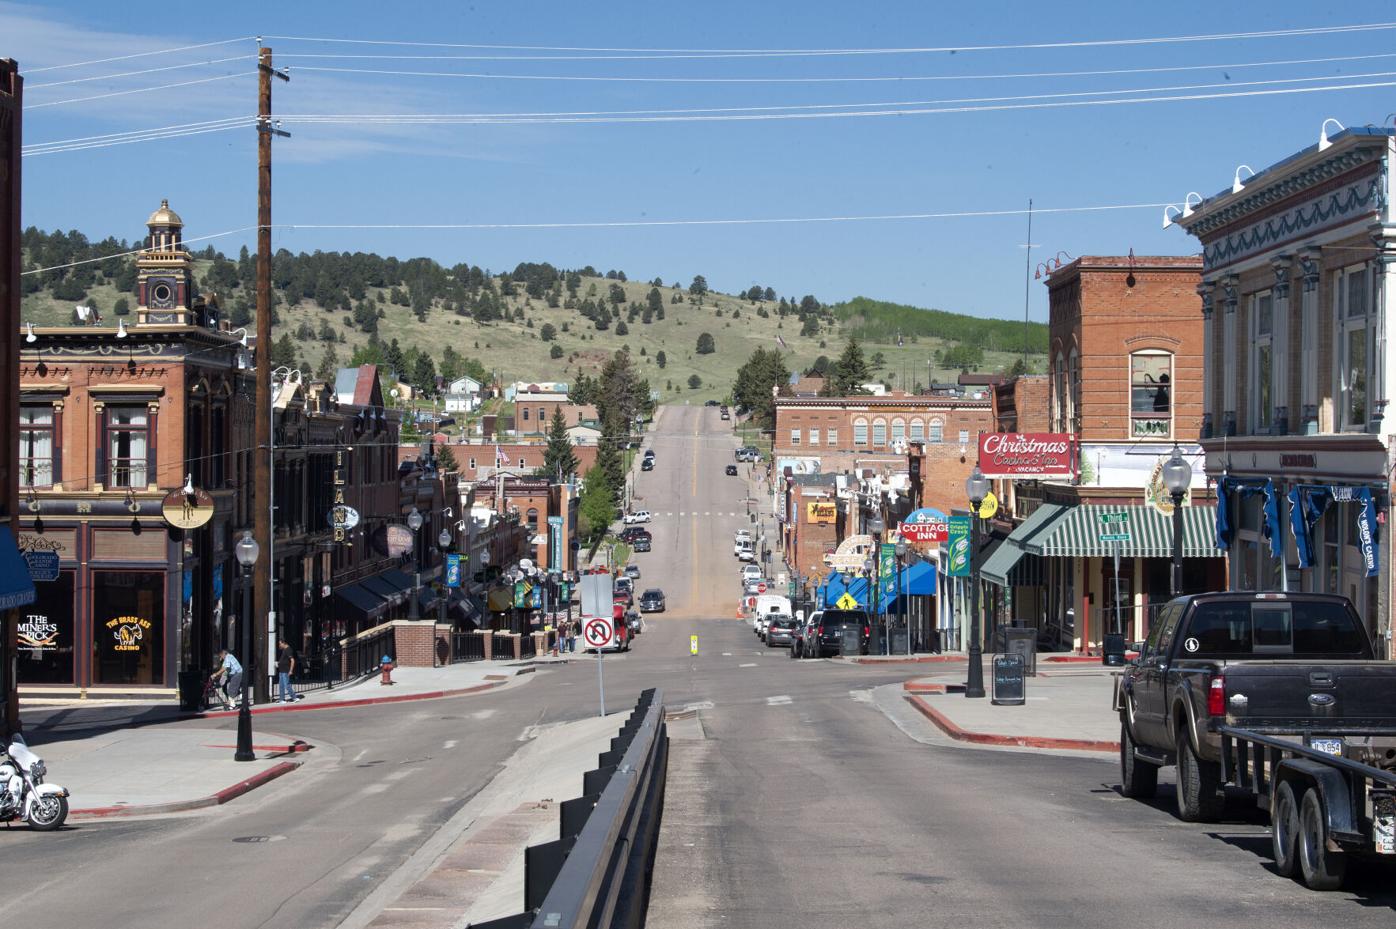 With multiple projects in the works, Cripple Creek sees movement